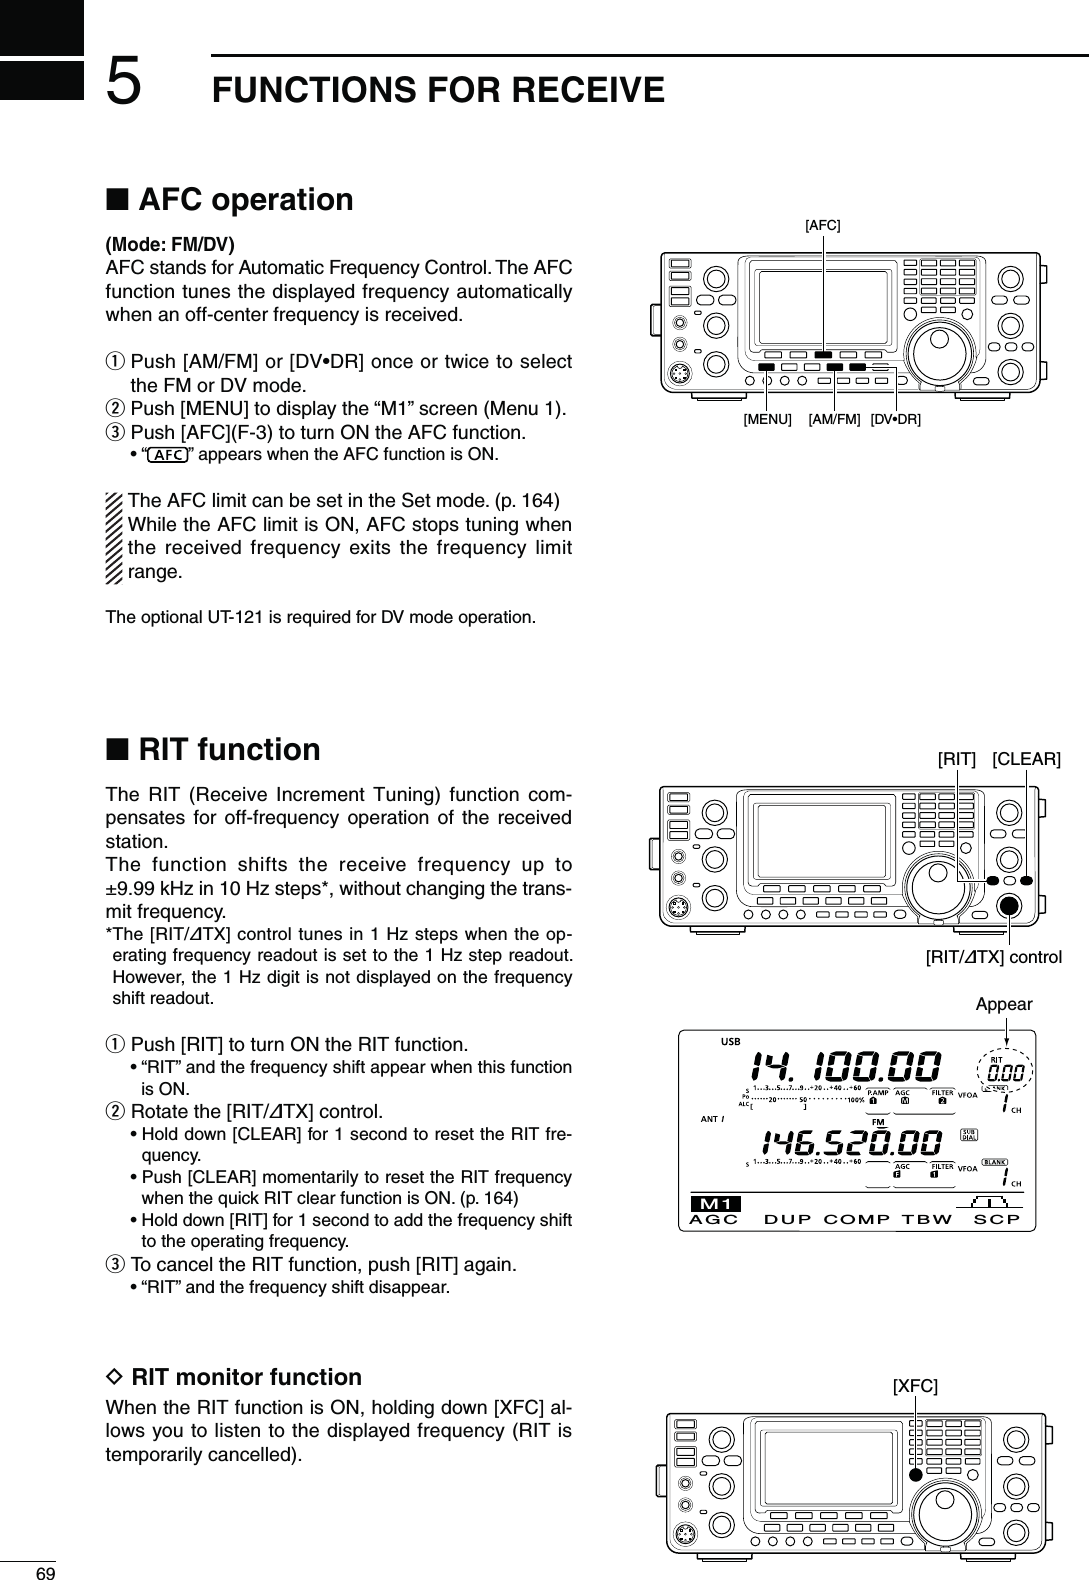 569FUNCTIONS FOR RECEIVEN!&amp;#OPERATION(Mode: FM/DVAFC stands for Automatic Frequency Control. The AFC function tunes the displayed frequency automatically when an off-center frequency is received.q  Push [AM/FM] or ;$6s$2= once or twice to select the FM or DV mode.w  Push [MENU] to display the “M1” screen (Menu 1).e  Push [AFC](F-3) to turn ON the AFC function.sh” appears when the AFC function is ON.The AFC limit can be set in the Set mode. (p. 164)While the AFC limit is ON, AFC stops tuning when the received frequency exits the frequency limit range.The optional UT-121 is required for DV mode operation.[AFC][AM/FM] [D[MENU]N2)4FUNCTIONThe RIT (Receive Increment Tuning) function com-pensates for off-frequency operation of the received station.The function shifts the receive frequency up to ±9.99 kHz in 10 Hz steps*, without changing the trans-mit frequency.* The [RIT/∂TX] control tunes in 1 Hz steps when the op-erating frequency readout is set to the 1 Hz step readout. However, the 1 Hz digit is not displayed on the frequency shift readout.q Push [RIT] to turn ON the RIT function.sh2)4vANDTHEFREQUENCYSHIFTAPPEARWHENTHISFUNCTIONis ON.w Rotate the [RIT/∂TX] control. s(OLDDOWN;#,%!2=FORSECONDTORESETTHE2)4FRE-quency. s0USH;#,%!2=MOMENTARILYTORESETTHE2)4FREQUENCYwhen the quick RIT clear function is ON. (p. 164) s(OLDDOWN;2)4=FORSECONDTOADDTHEFREQUENCYSHIFTto the operating frequency.e To cancel the RIT function, push [RIT] again. sh2)4vANDTHEFREQUENCYSHIFTDISAPPEARD2)4MONITORFUNCTIONWhen the RIT function is ON, holding down [XFC] al-lows you to listen to the displayed frequency (RIT is temporarily cancelled).[RIT] [CLEAR][RIT/∂TX] controlDUPAGC COMP TBW SCPM1Appear[XFC]